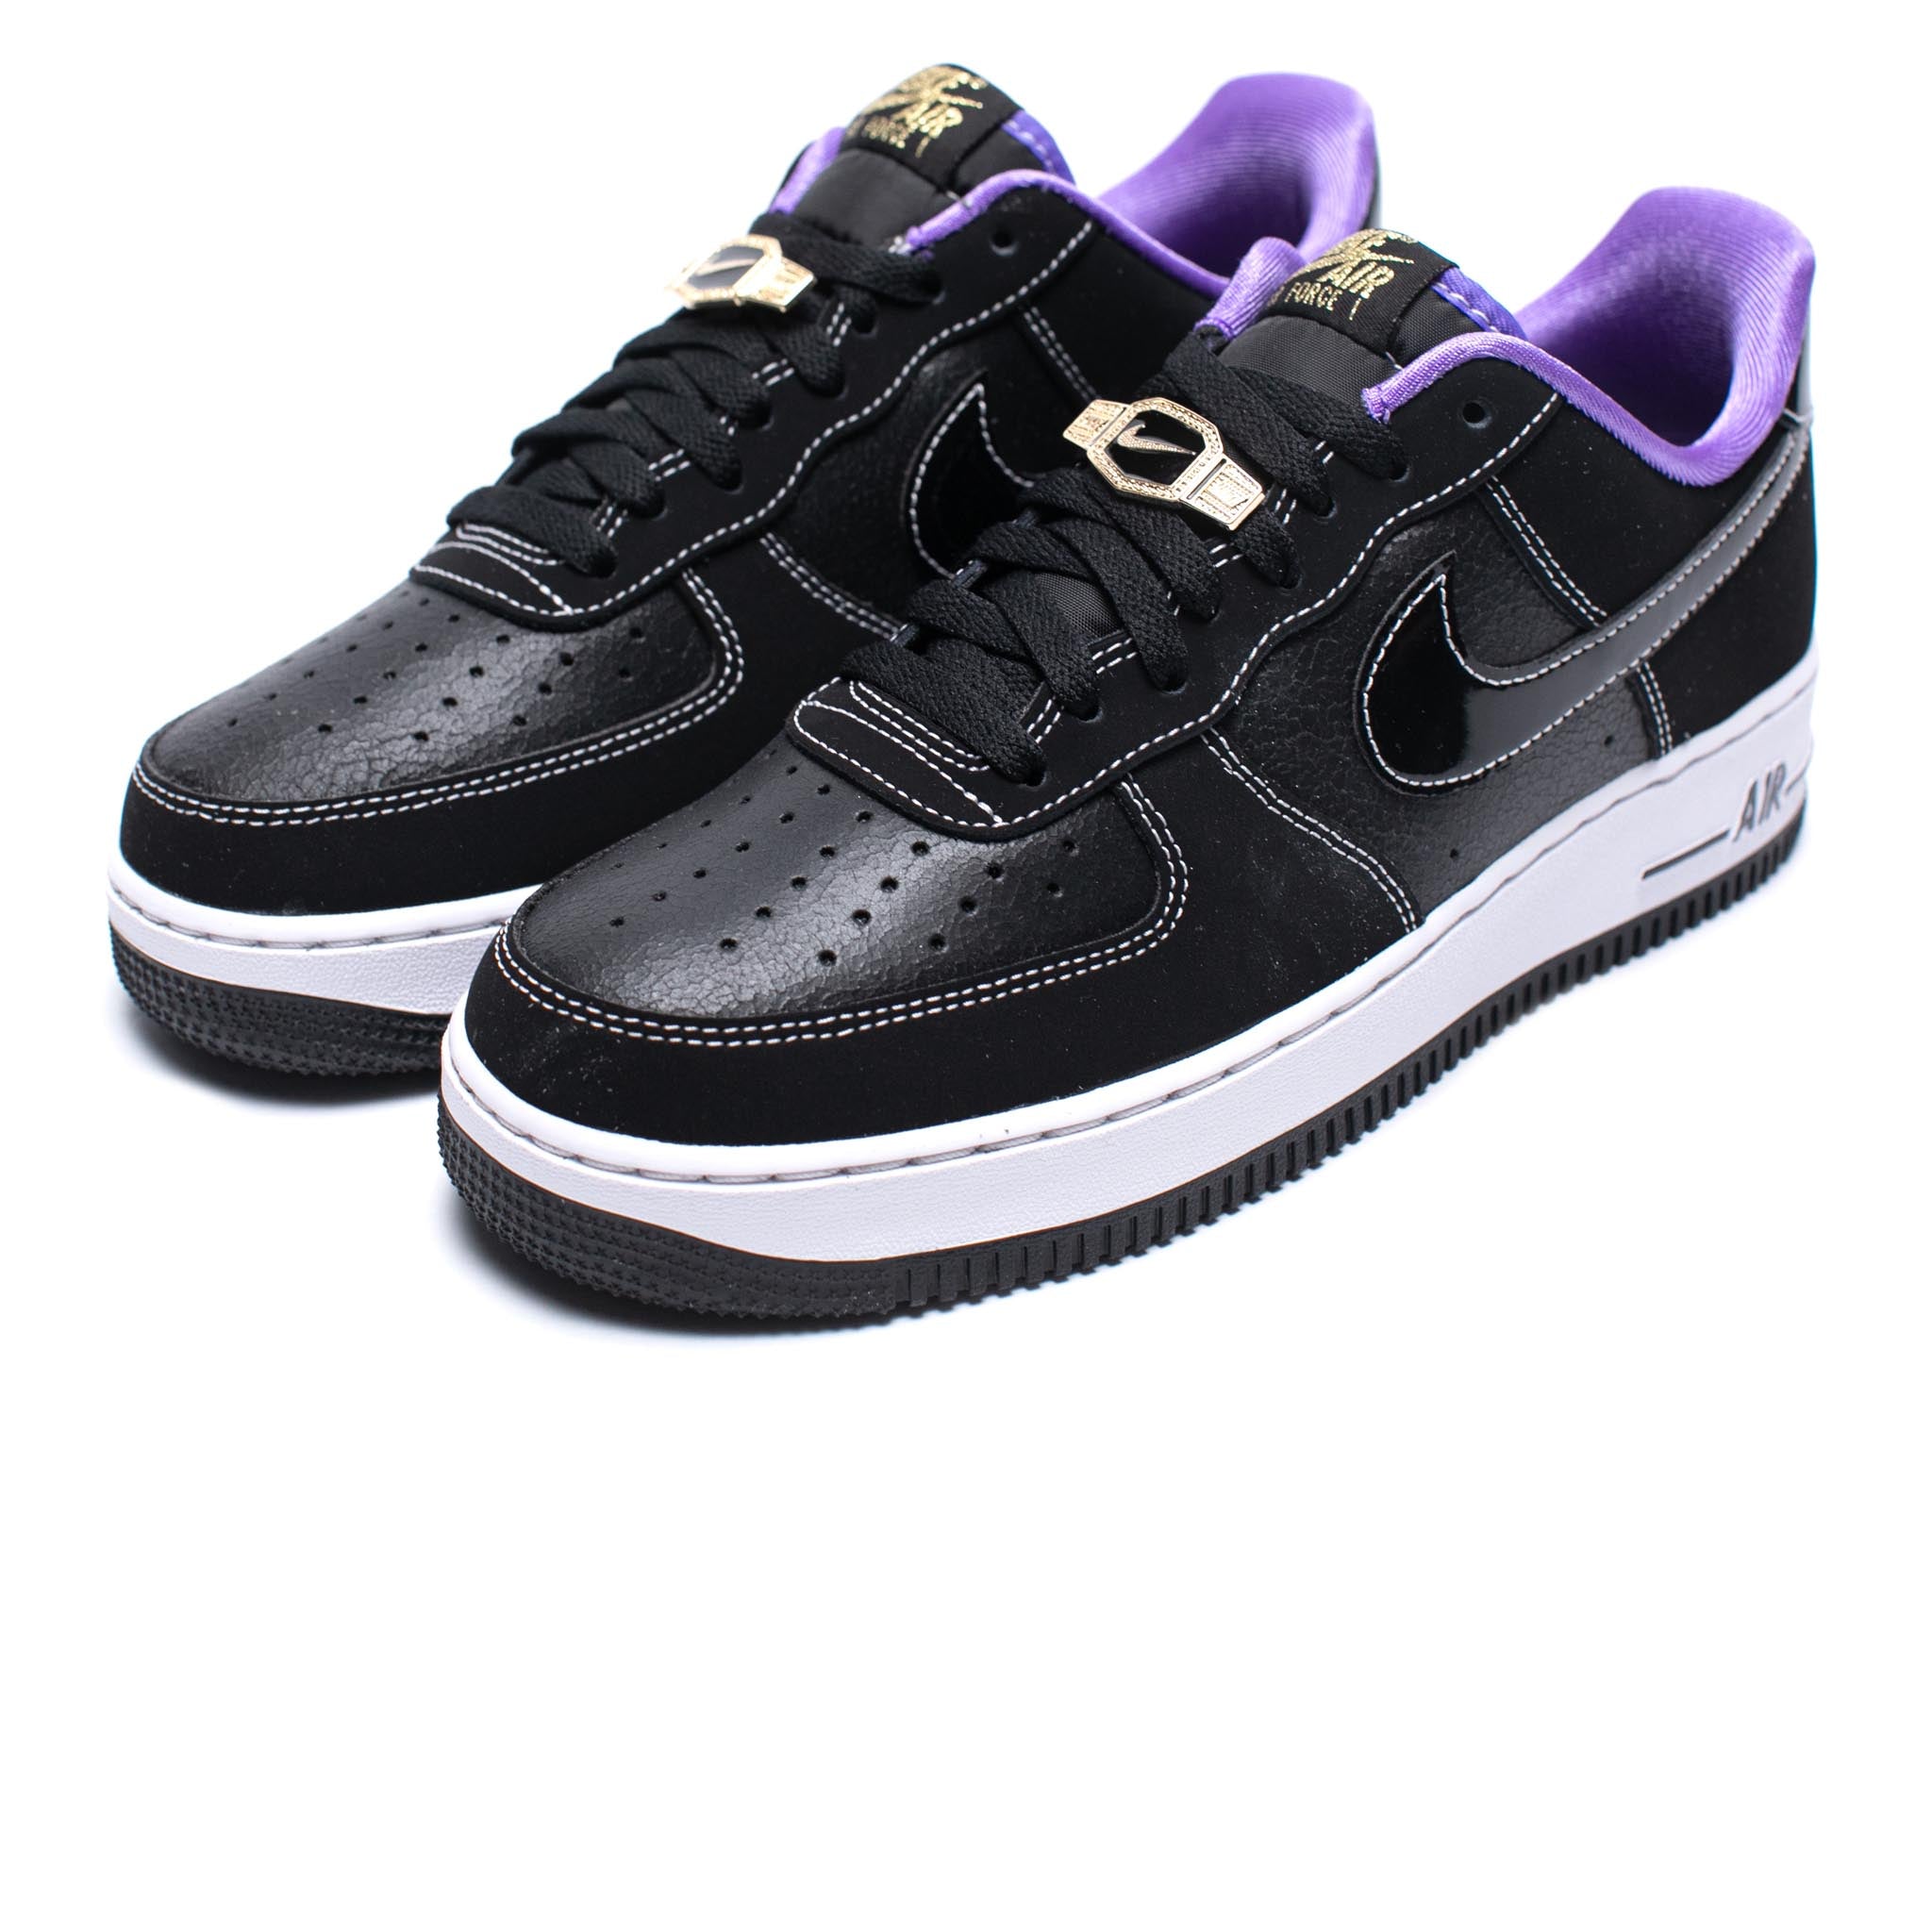 Nike Air Force 1 Low '07 Lv8 world Champ Black Purple Shoes for